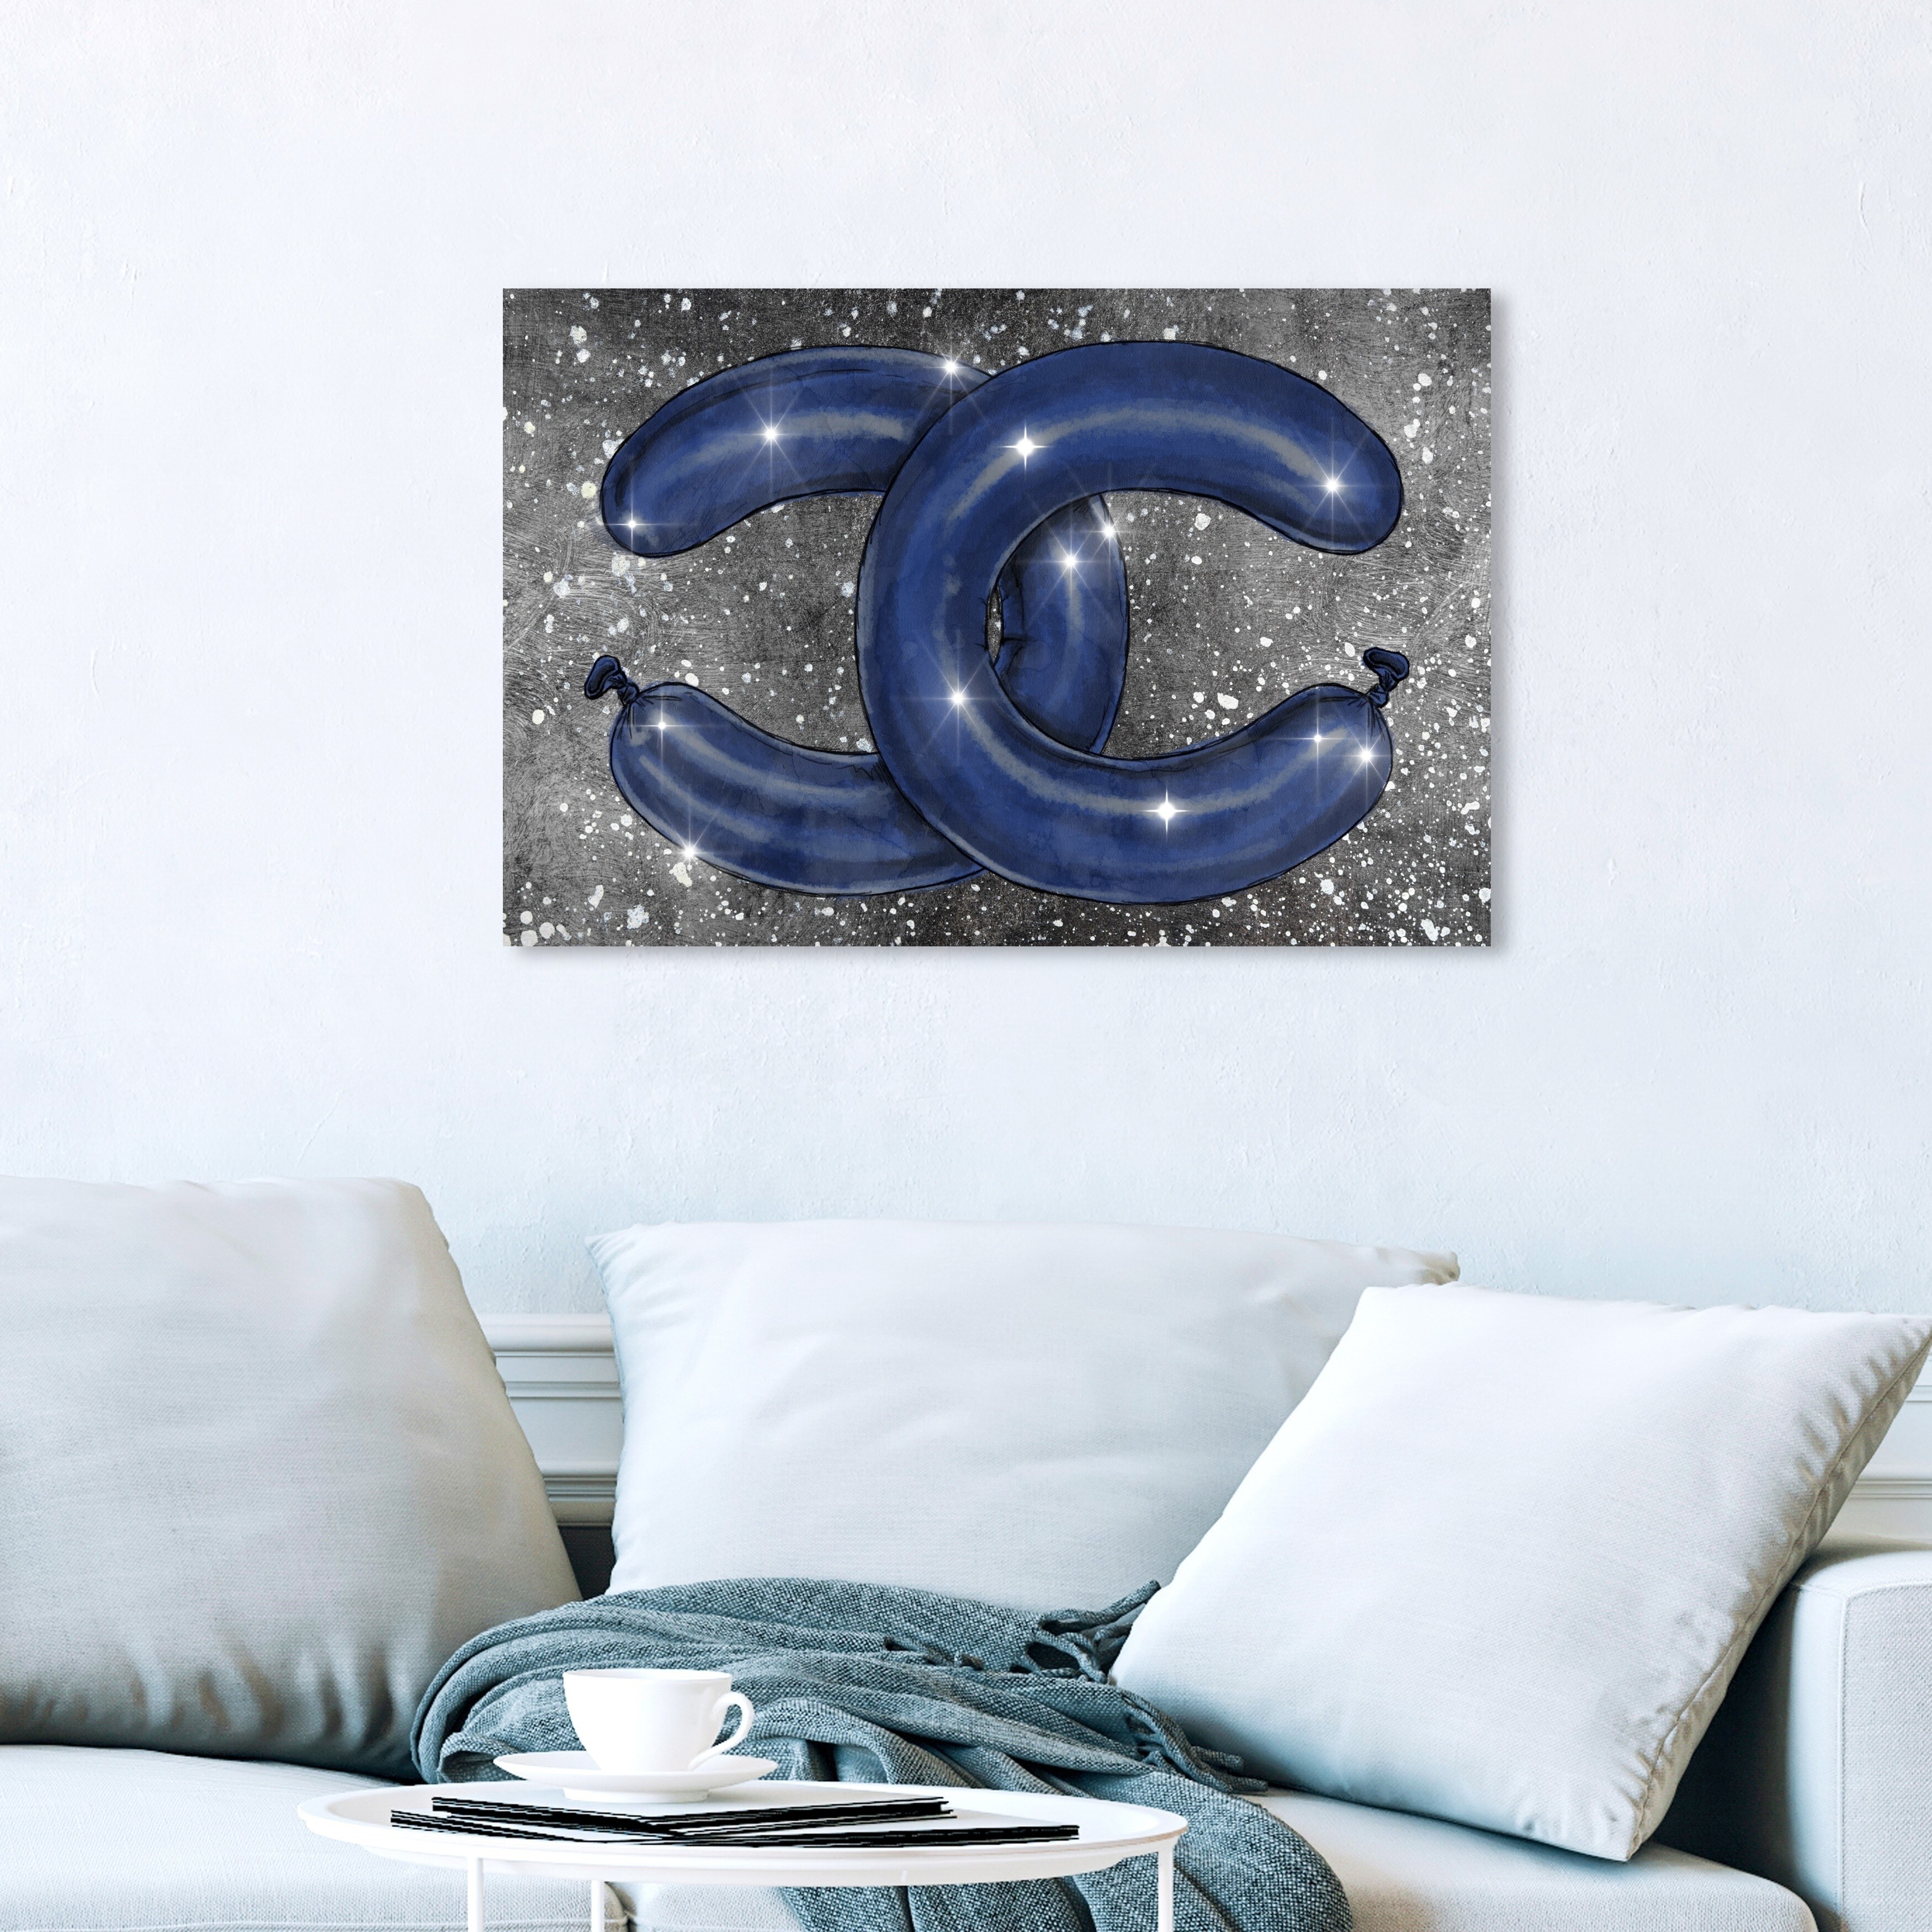 Oliver Gal 'Emballeur Navy' Fashion and Glam Framed Wall Art Prints Road  Signs - Blue, Gold - Bed Bath & Beyond - 31287477